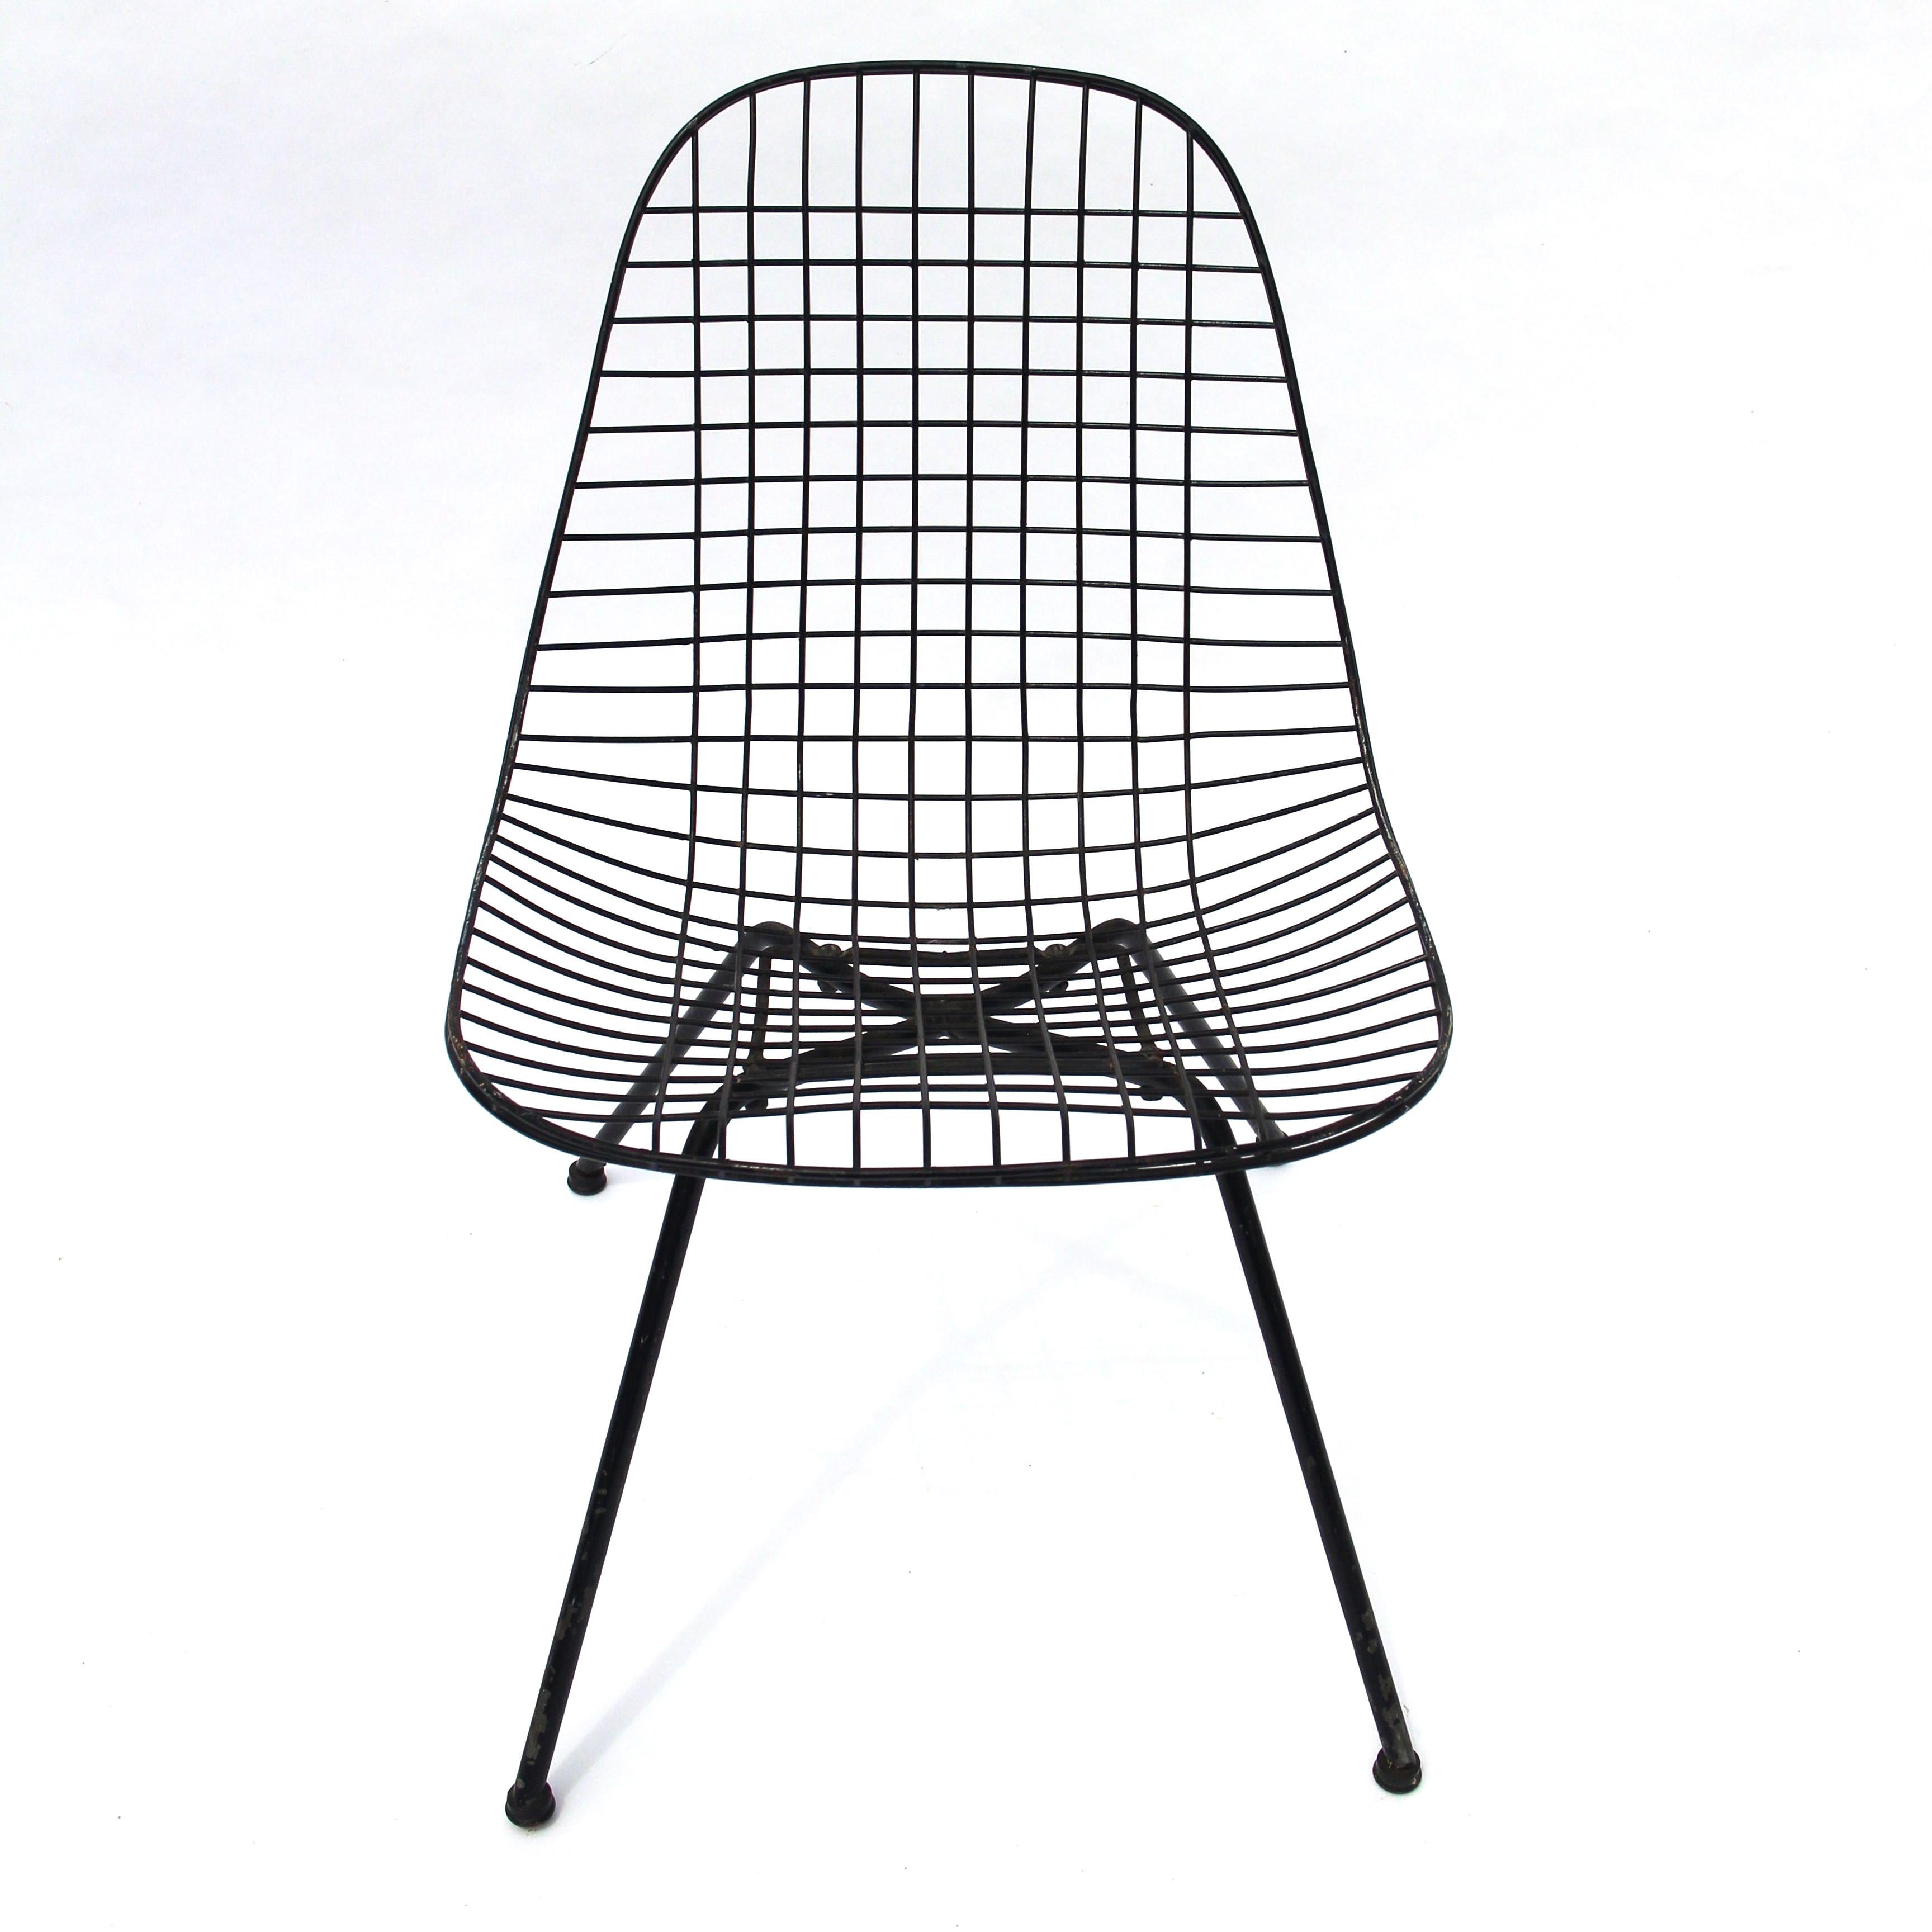 Hard-to-find First Generation Eames LKX (Low/Wire/X-base) lounge chairs, only made one year with this configuration; 1951. Made by Charles & Ray Eames for Herman Miller.  Various areas of wear/oxidation, please see pictures. The legs are solid, the